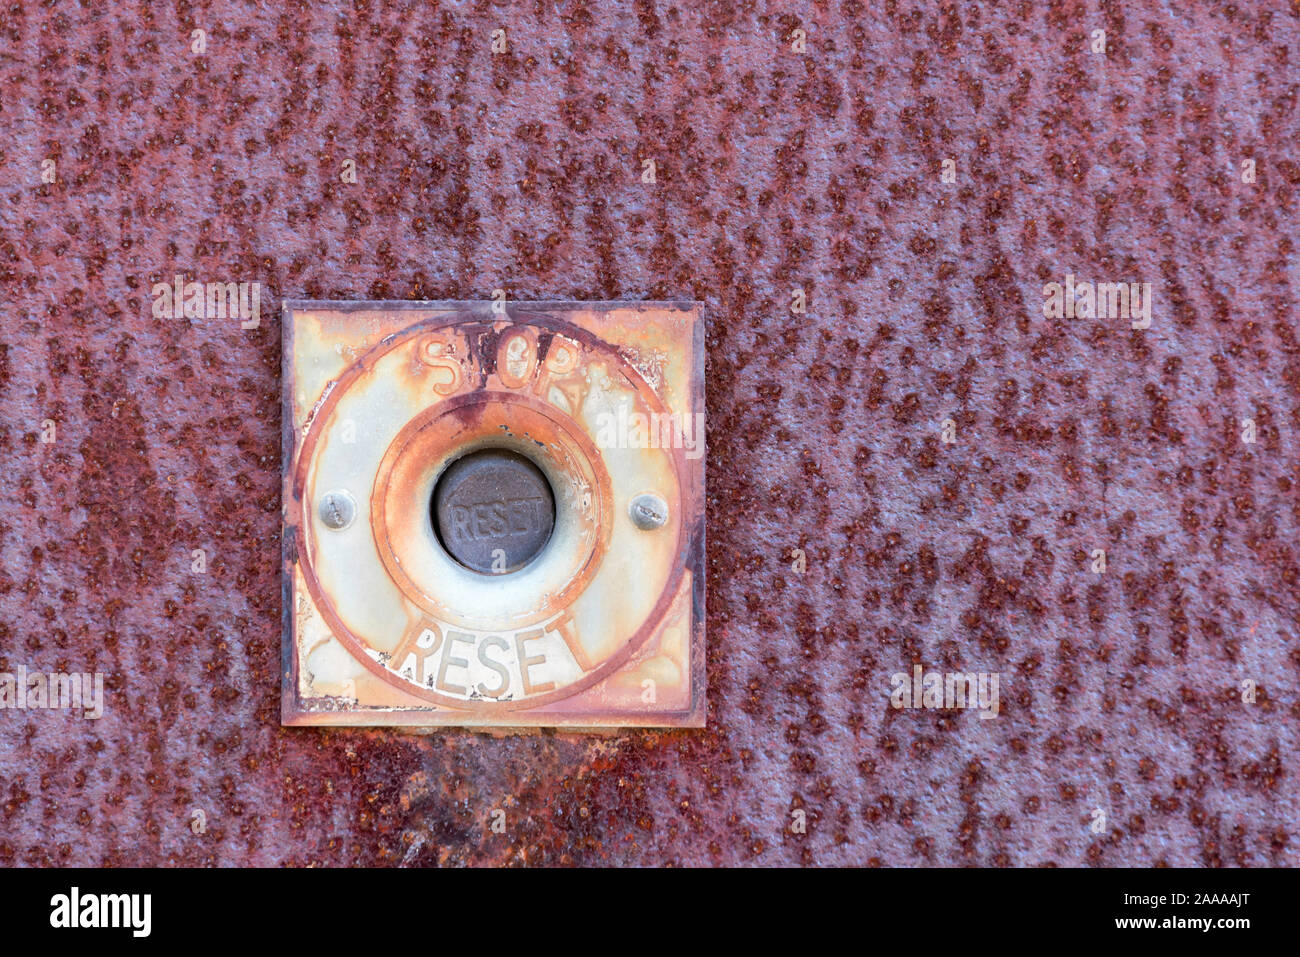 An old stop and reset button mounted on a rusted metal plate Stock Photo